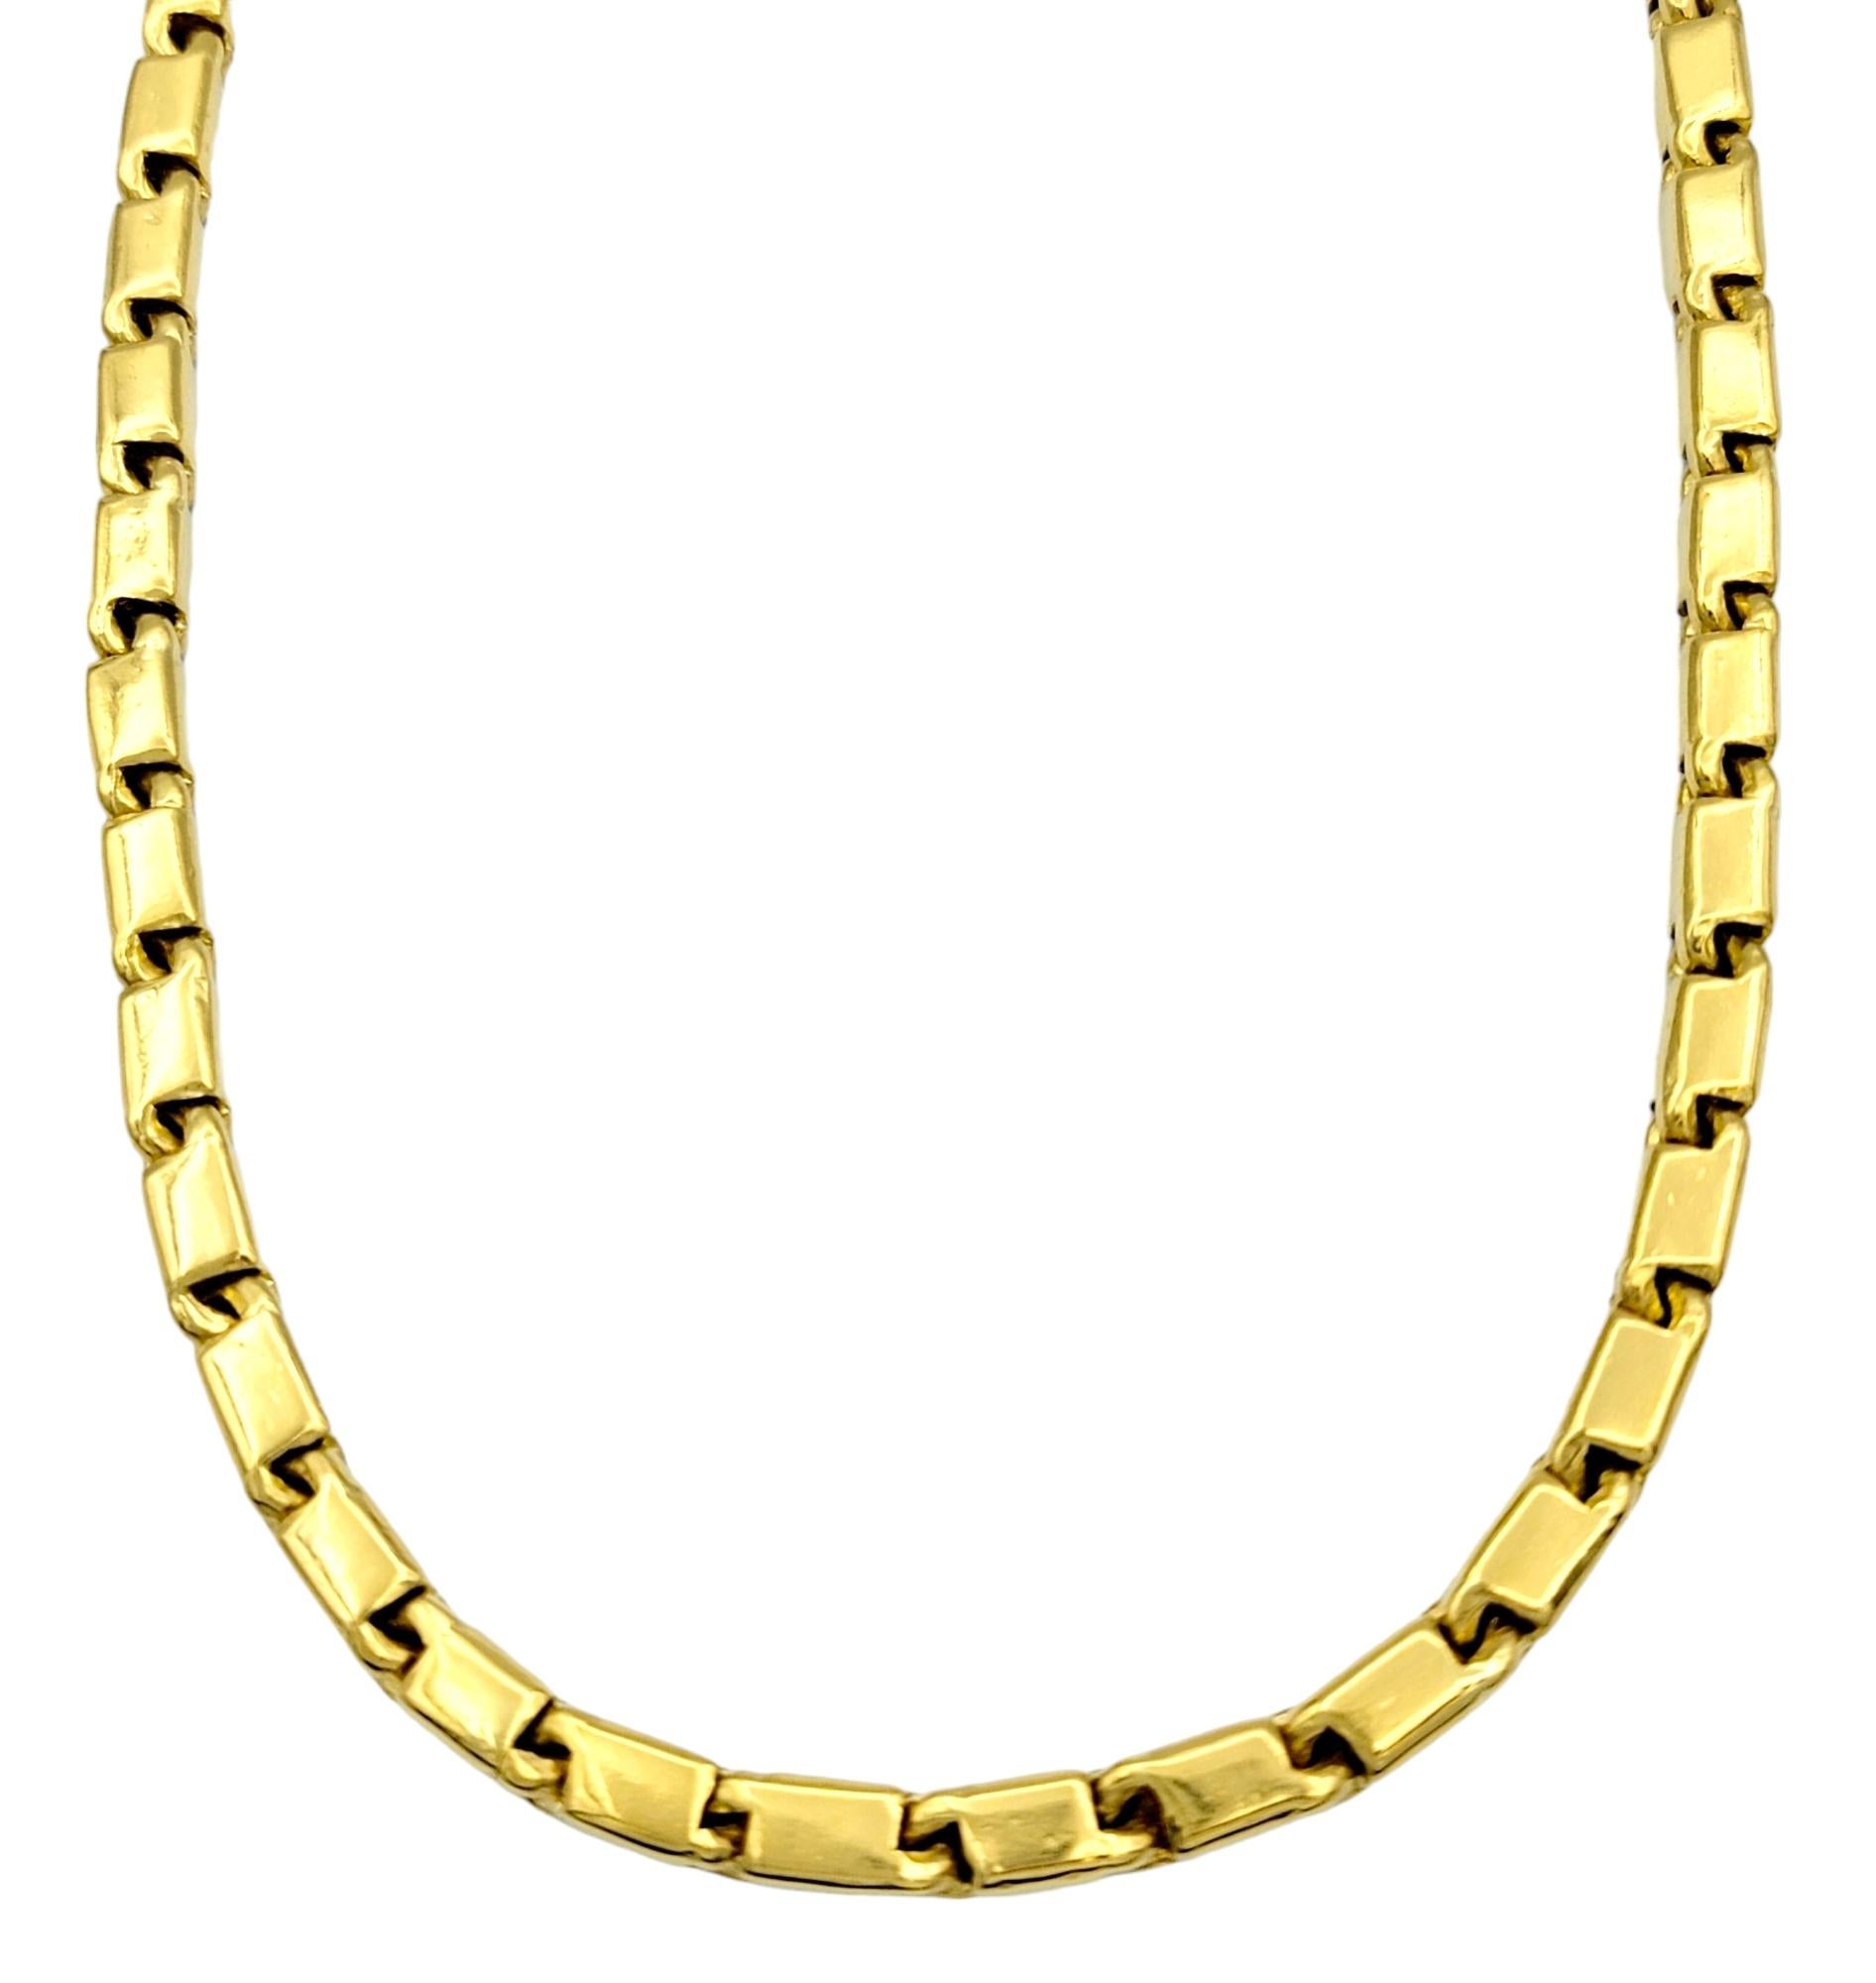 This exceptional 24 karat yellow gold chunky box chain necklace exemplifies the pinnacle of luxury and craftsmanship. The use of pure 24 karat gold ensures not only a resplendent, rich color but also conveys a high quality and weight that sets it